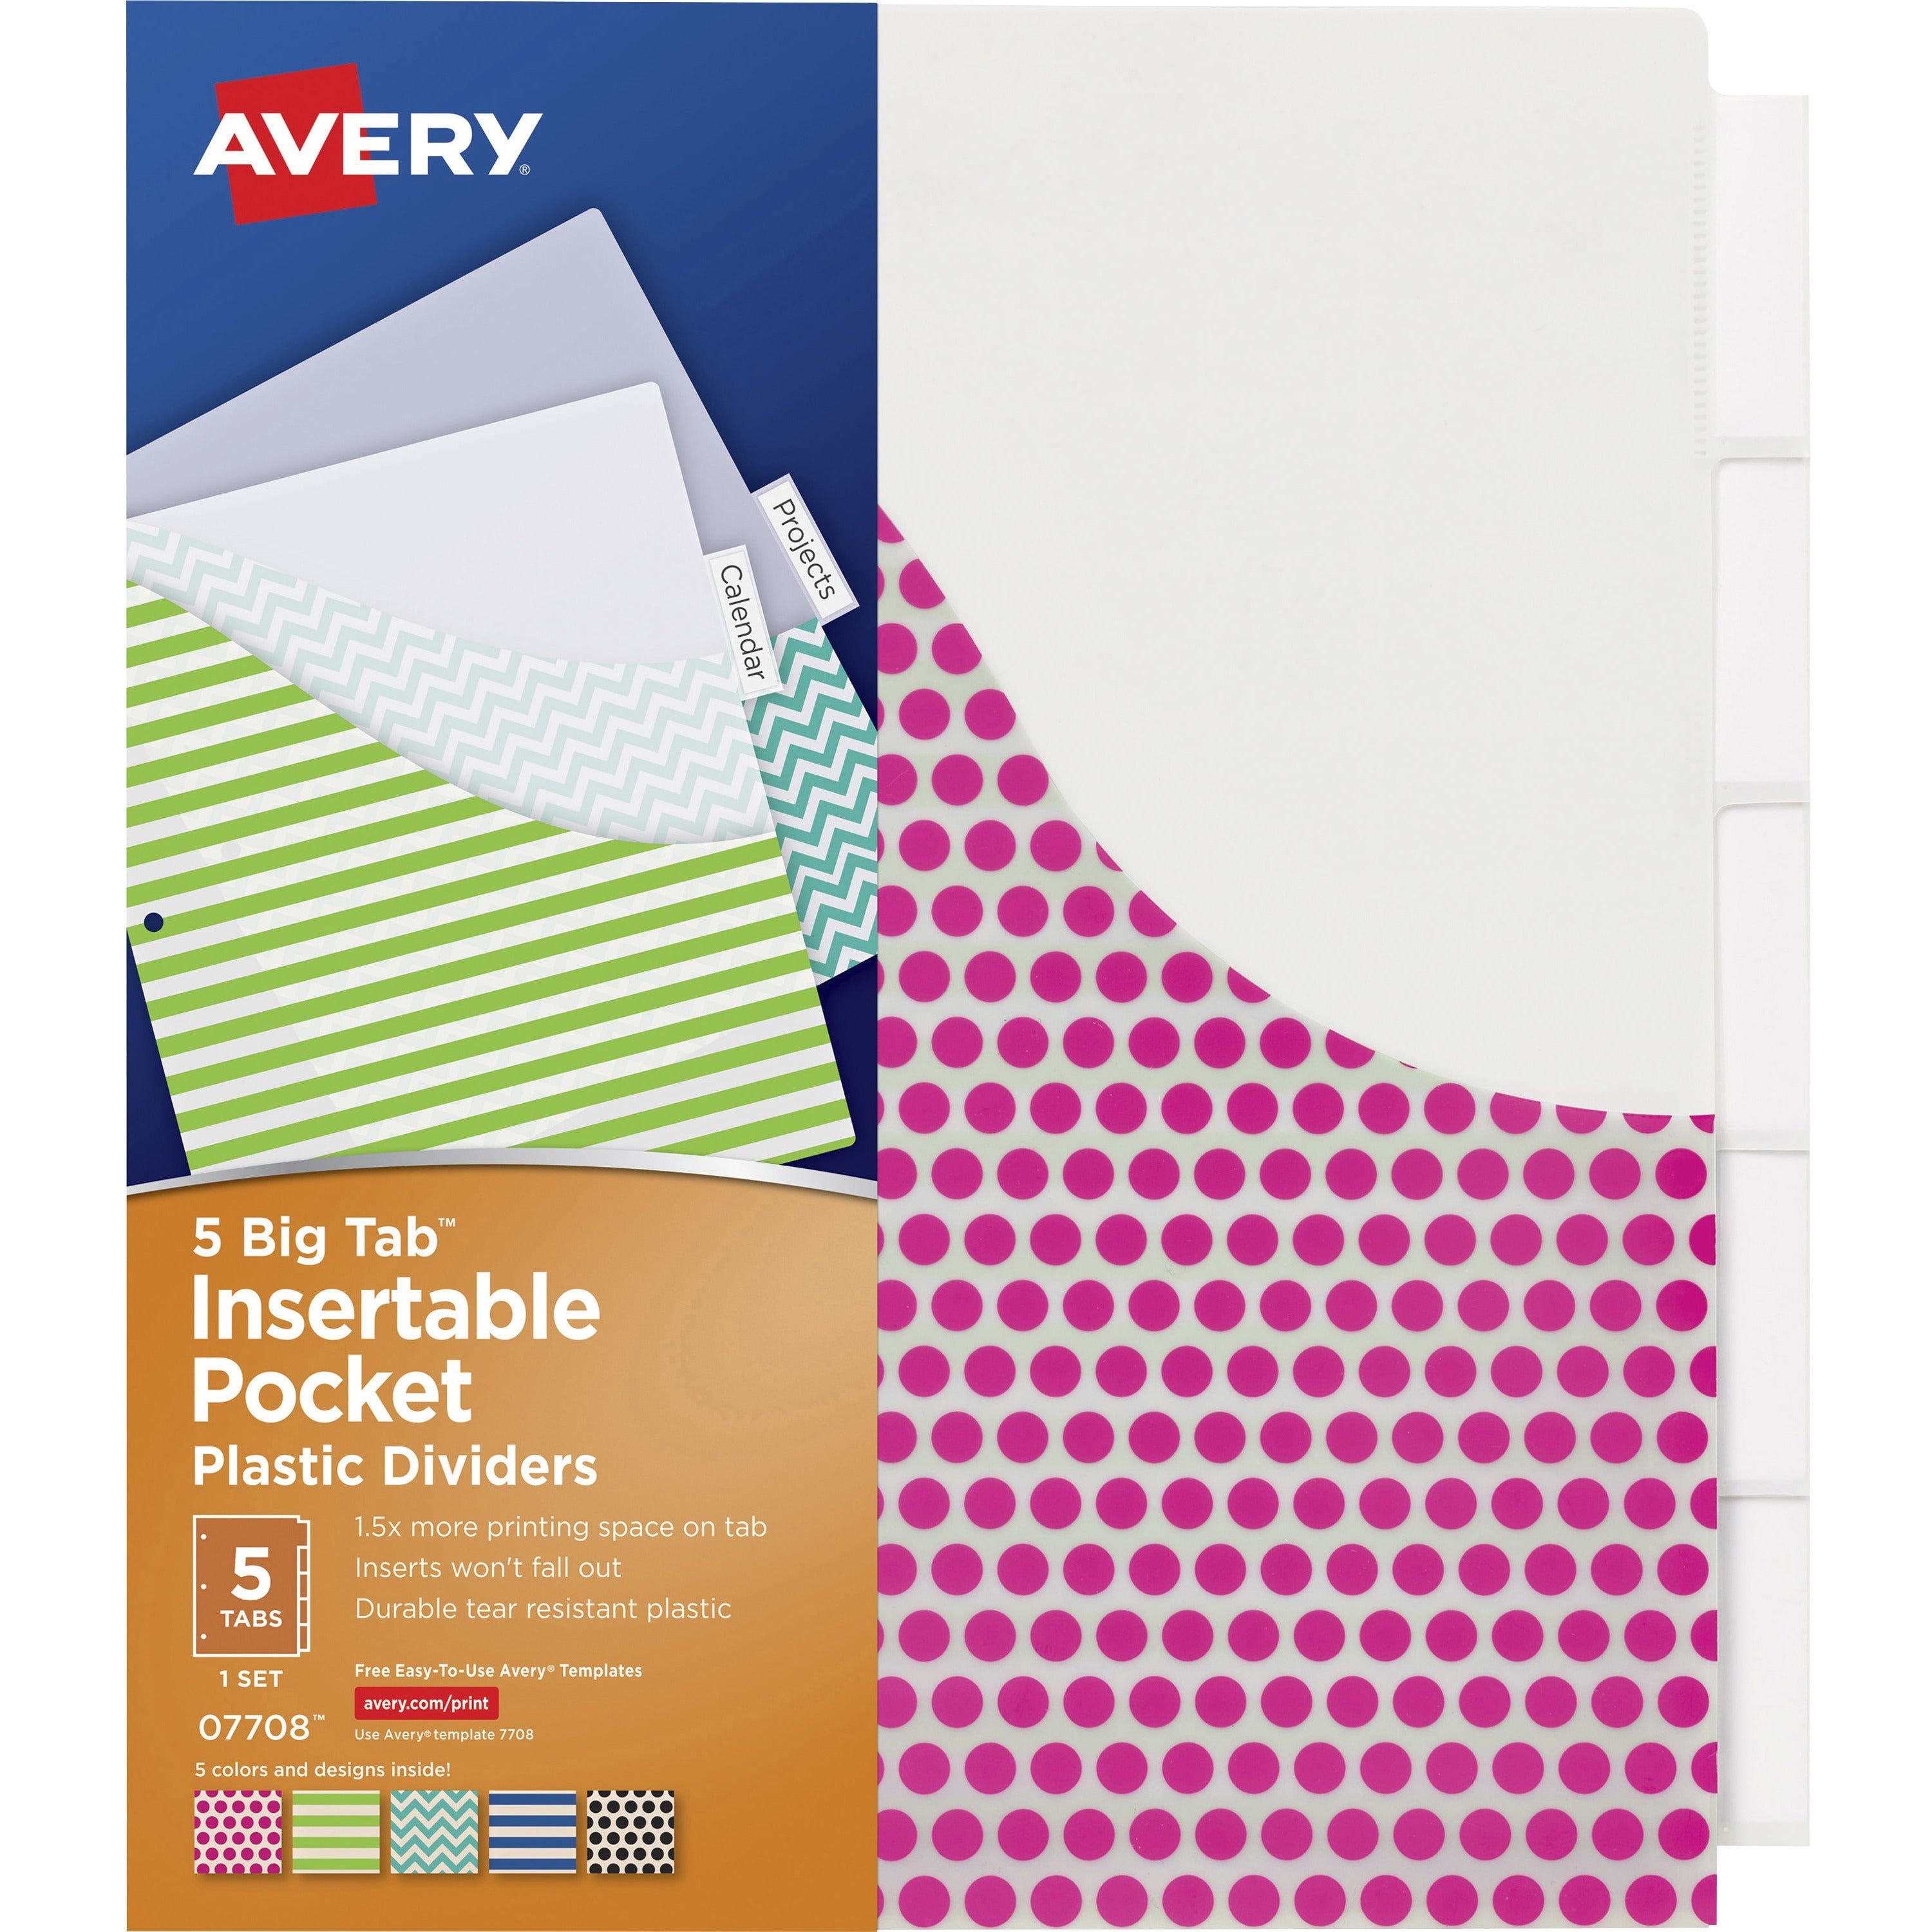 avery-big-tab-insertable-plastic-pocket-dividers-180-x-dividers-180-tabs-5-5-tabs-set-93-divider-width-x-1113-divider-length-3-hole-punched-multicolor-plastic-divider-clear-plastic-tabs-36-carton_ave07708 - 1